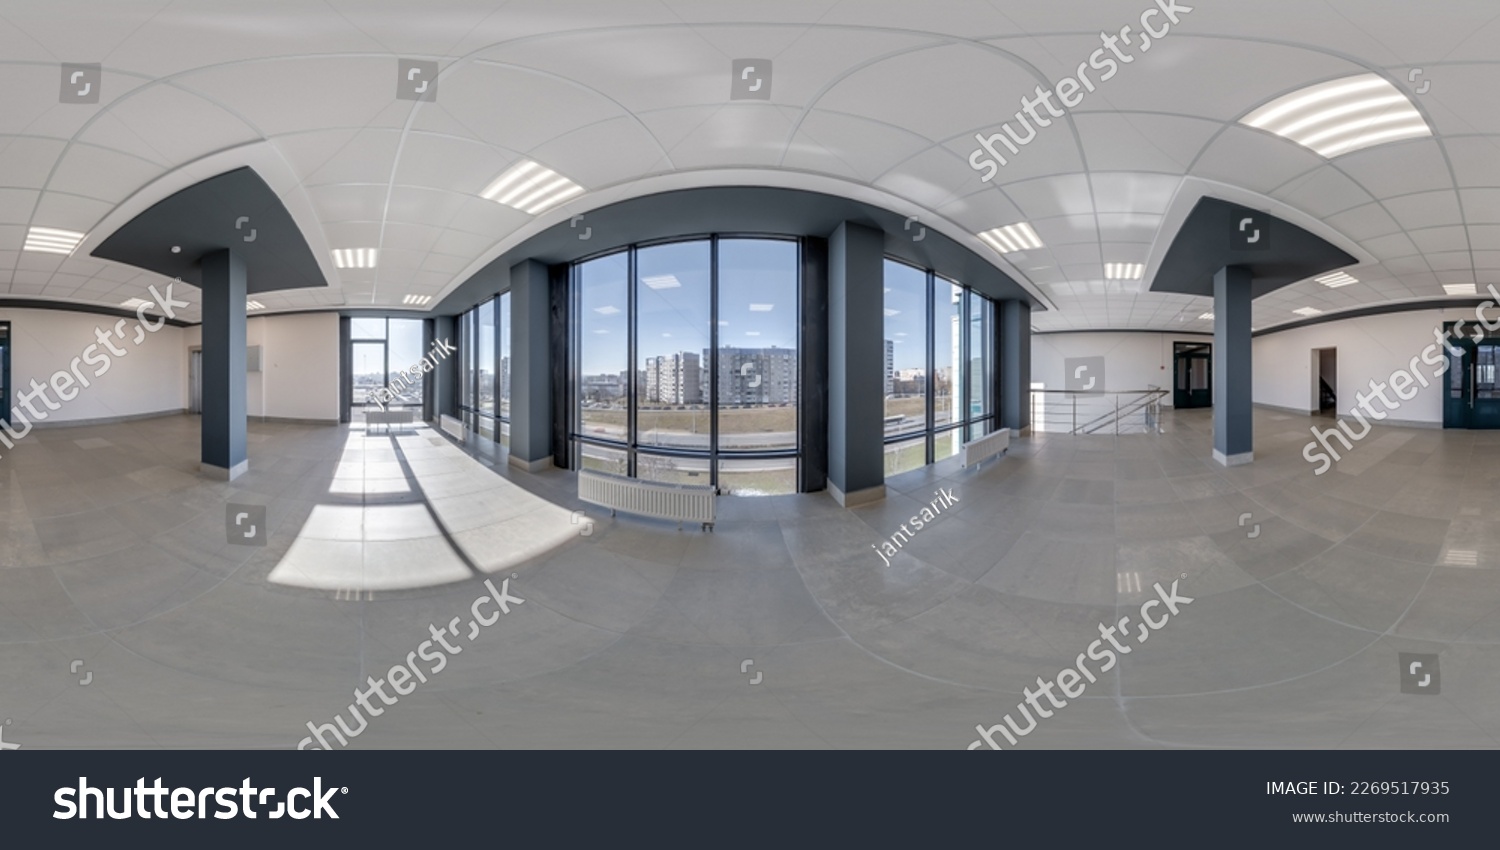 full seamless spherical hdri 360 panorama view in empty modern hall with columns, doors and panoramic windows in equirectangular projection, ready for AR VR content #2269517935